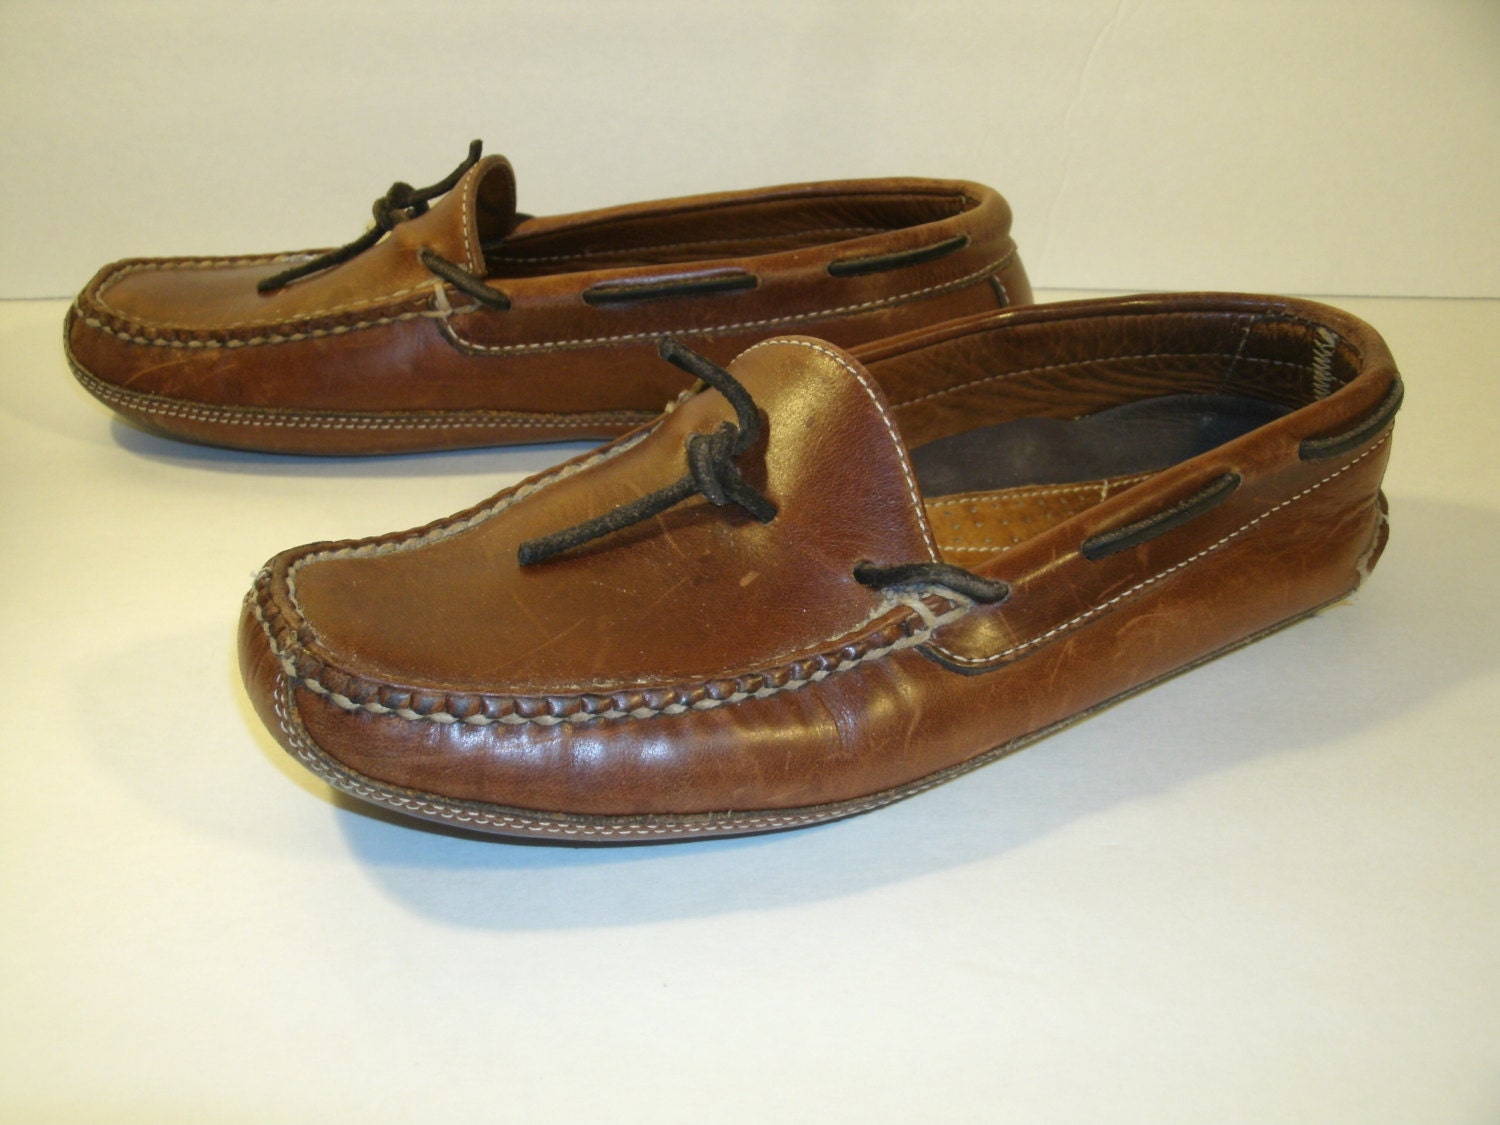 LL Bean Soft Sole Moccasins Brown Leather Women's Size 8